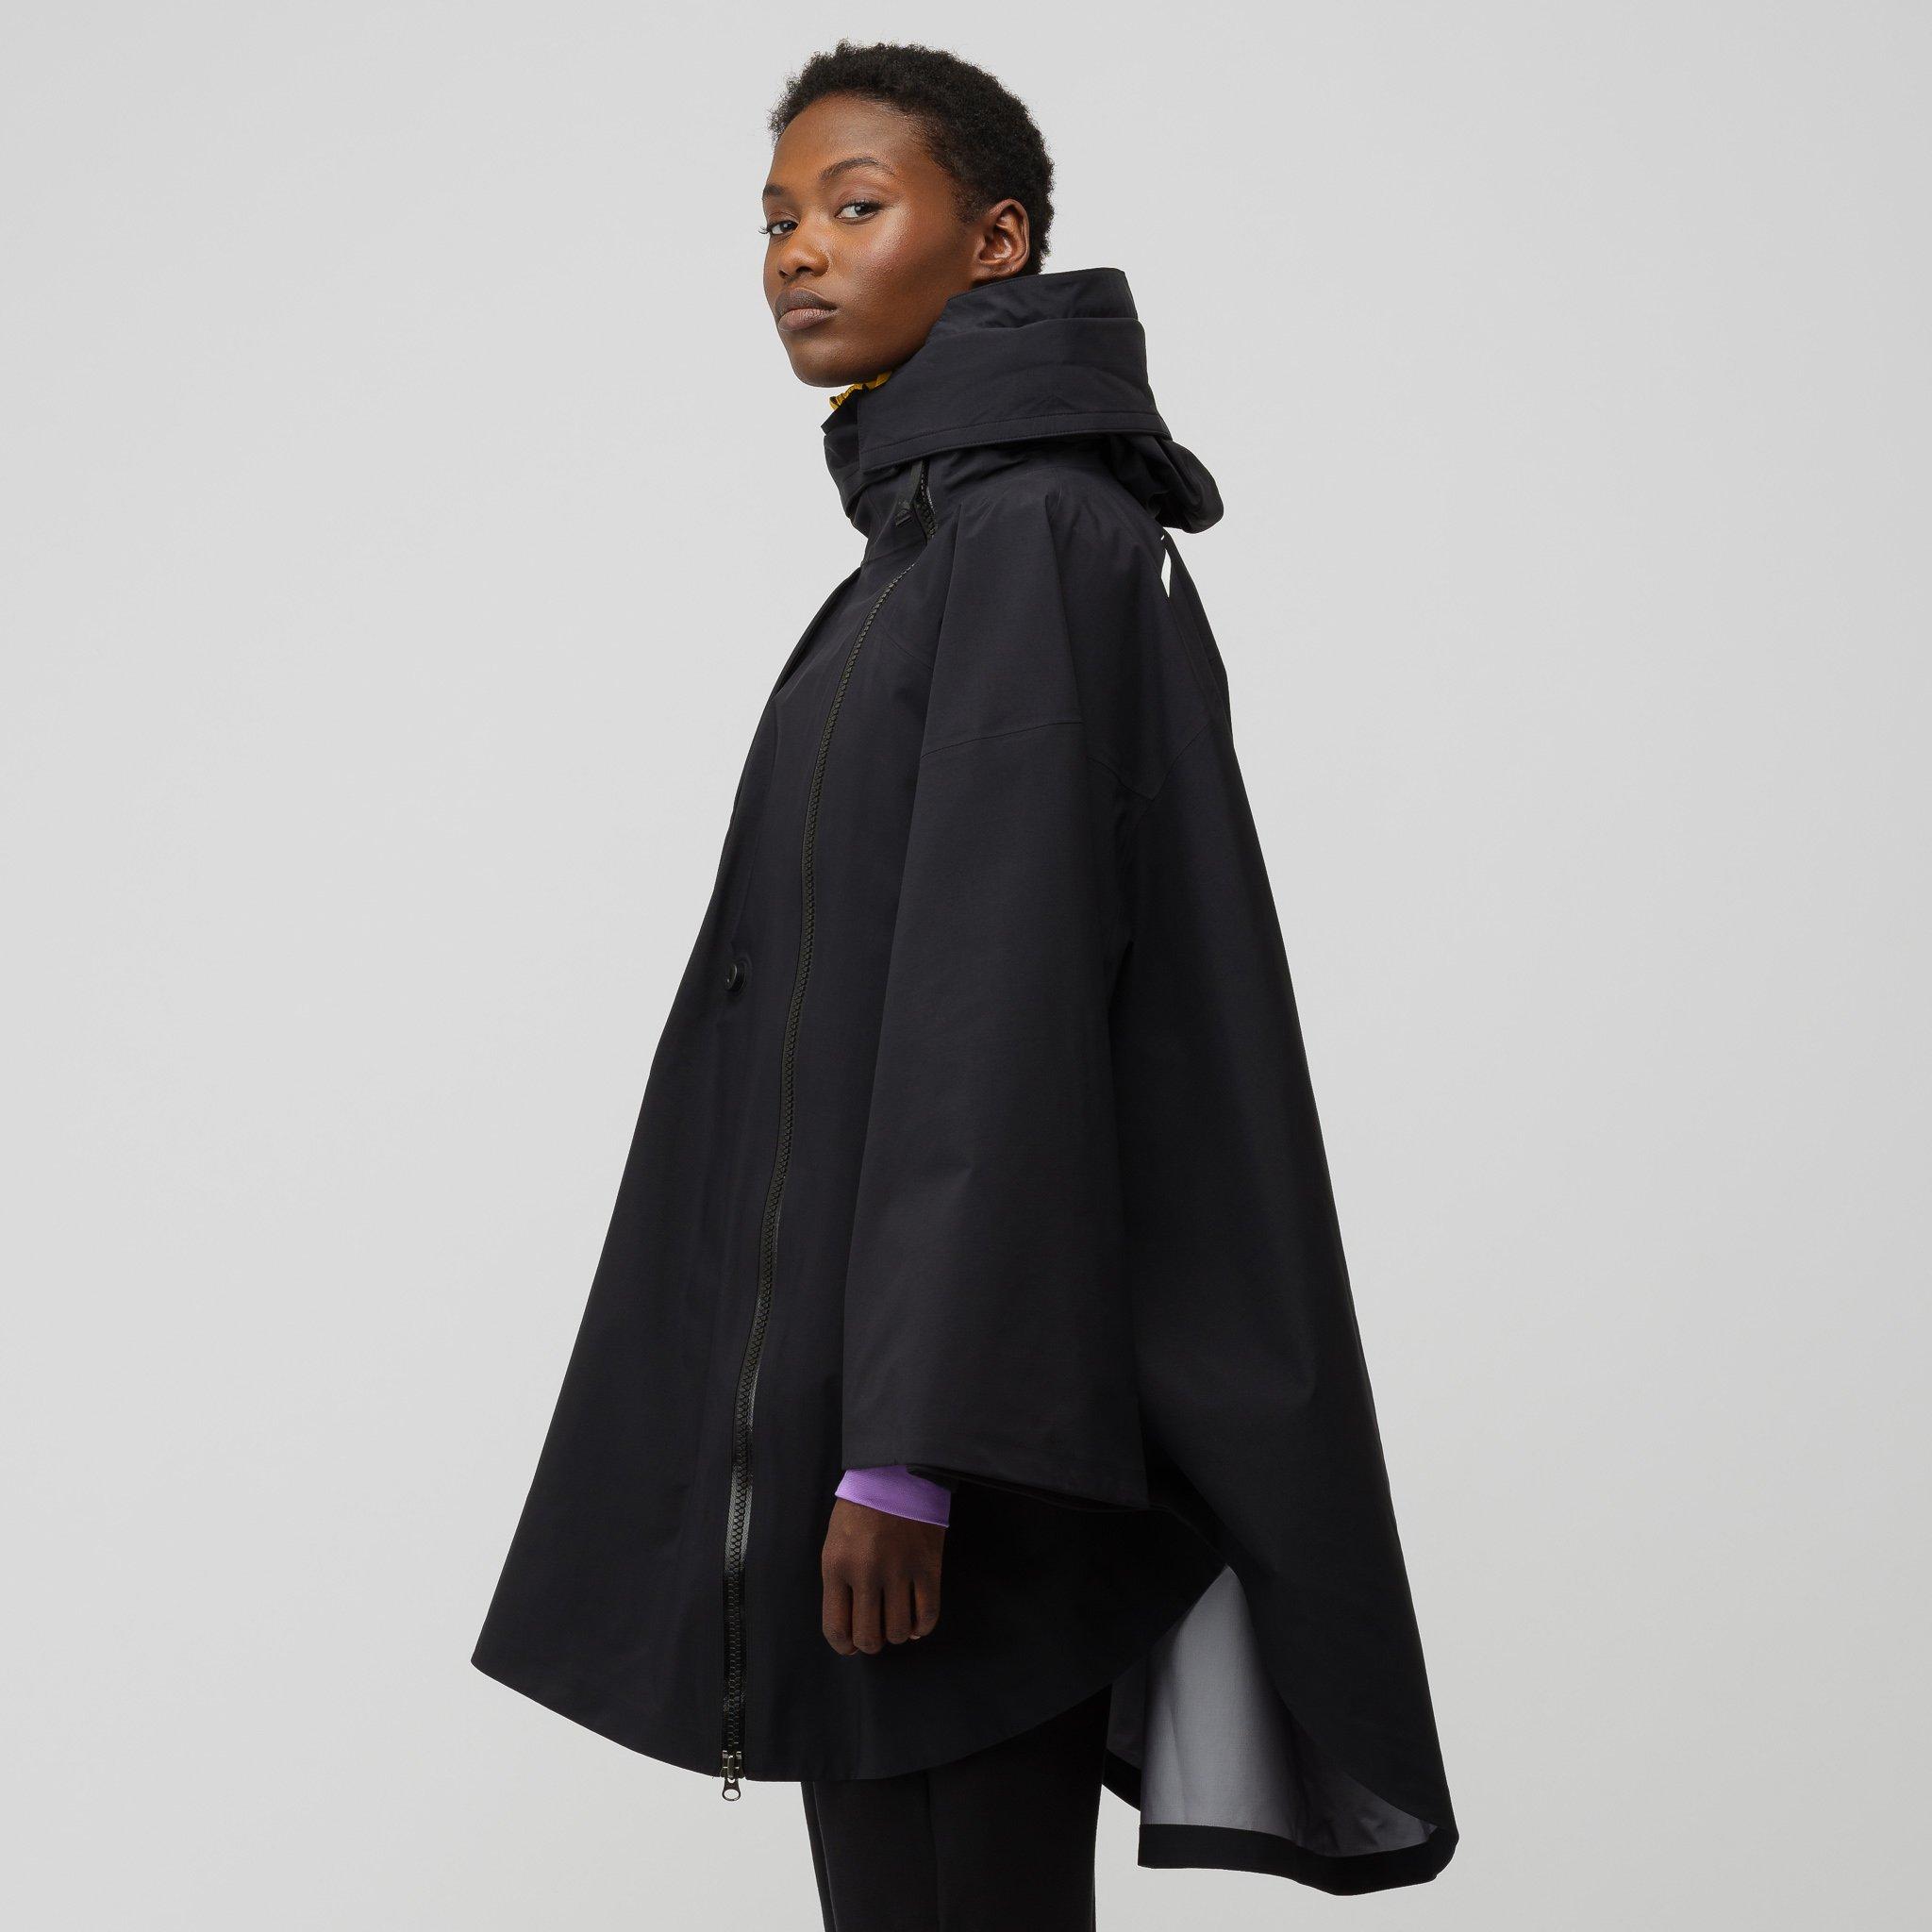 Nike Synthetic Acg 3-in-1 System Poncho in Black - Lyst